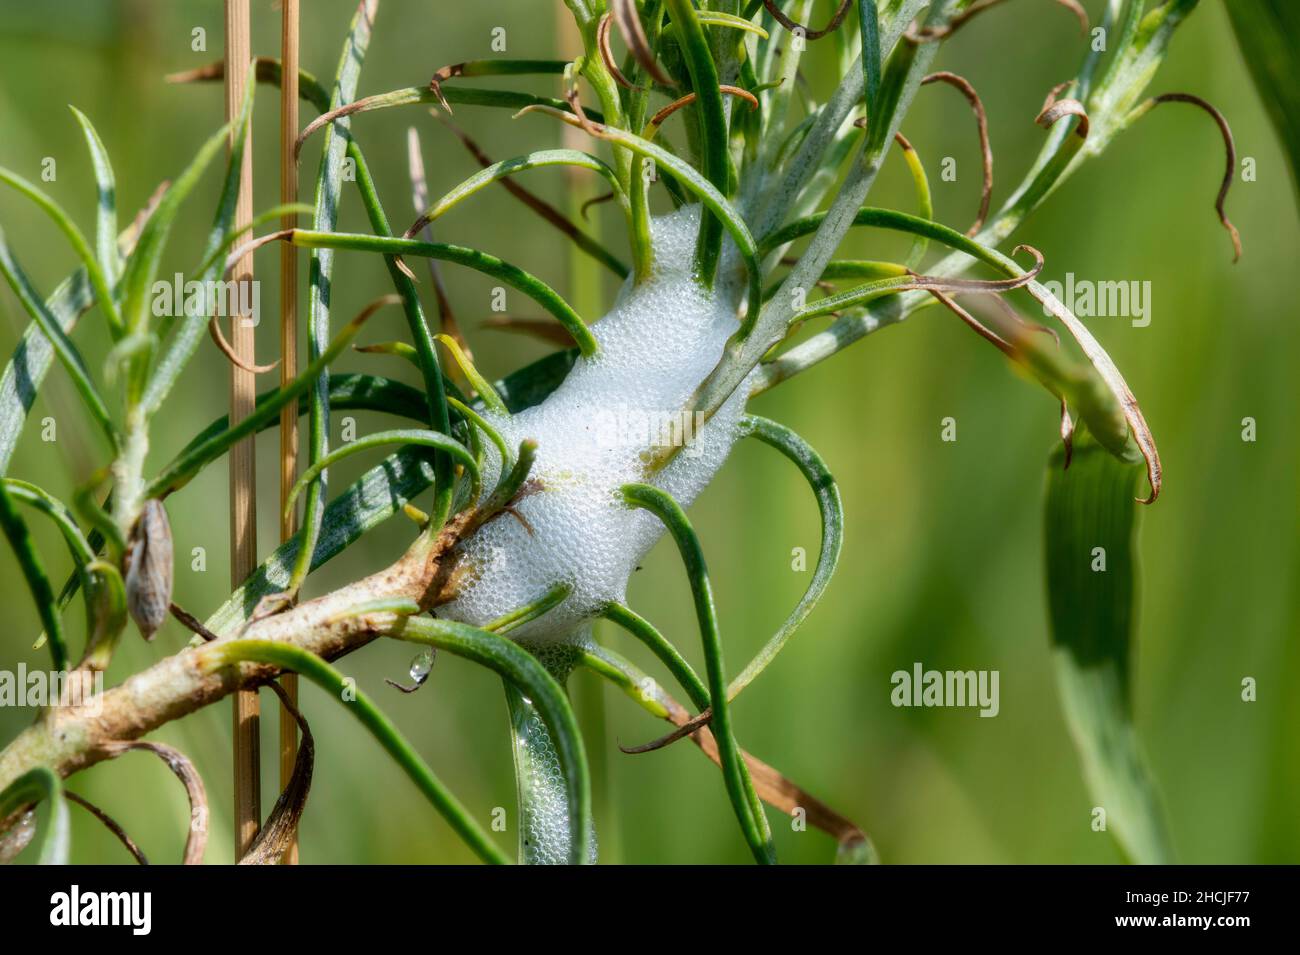 Spittle on a Branch from a Bug in the Genus Philaenus Stock Photo